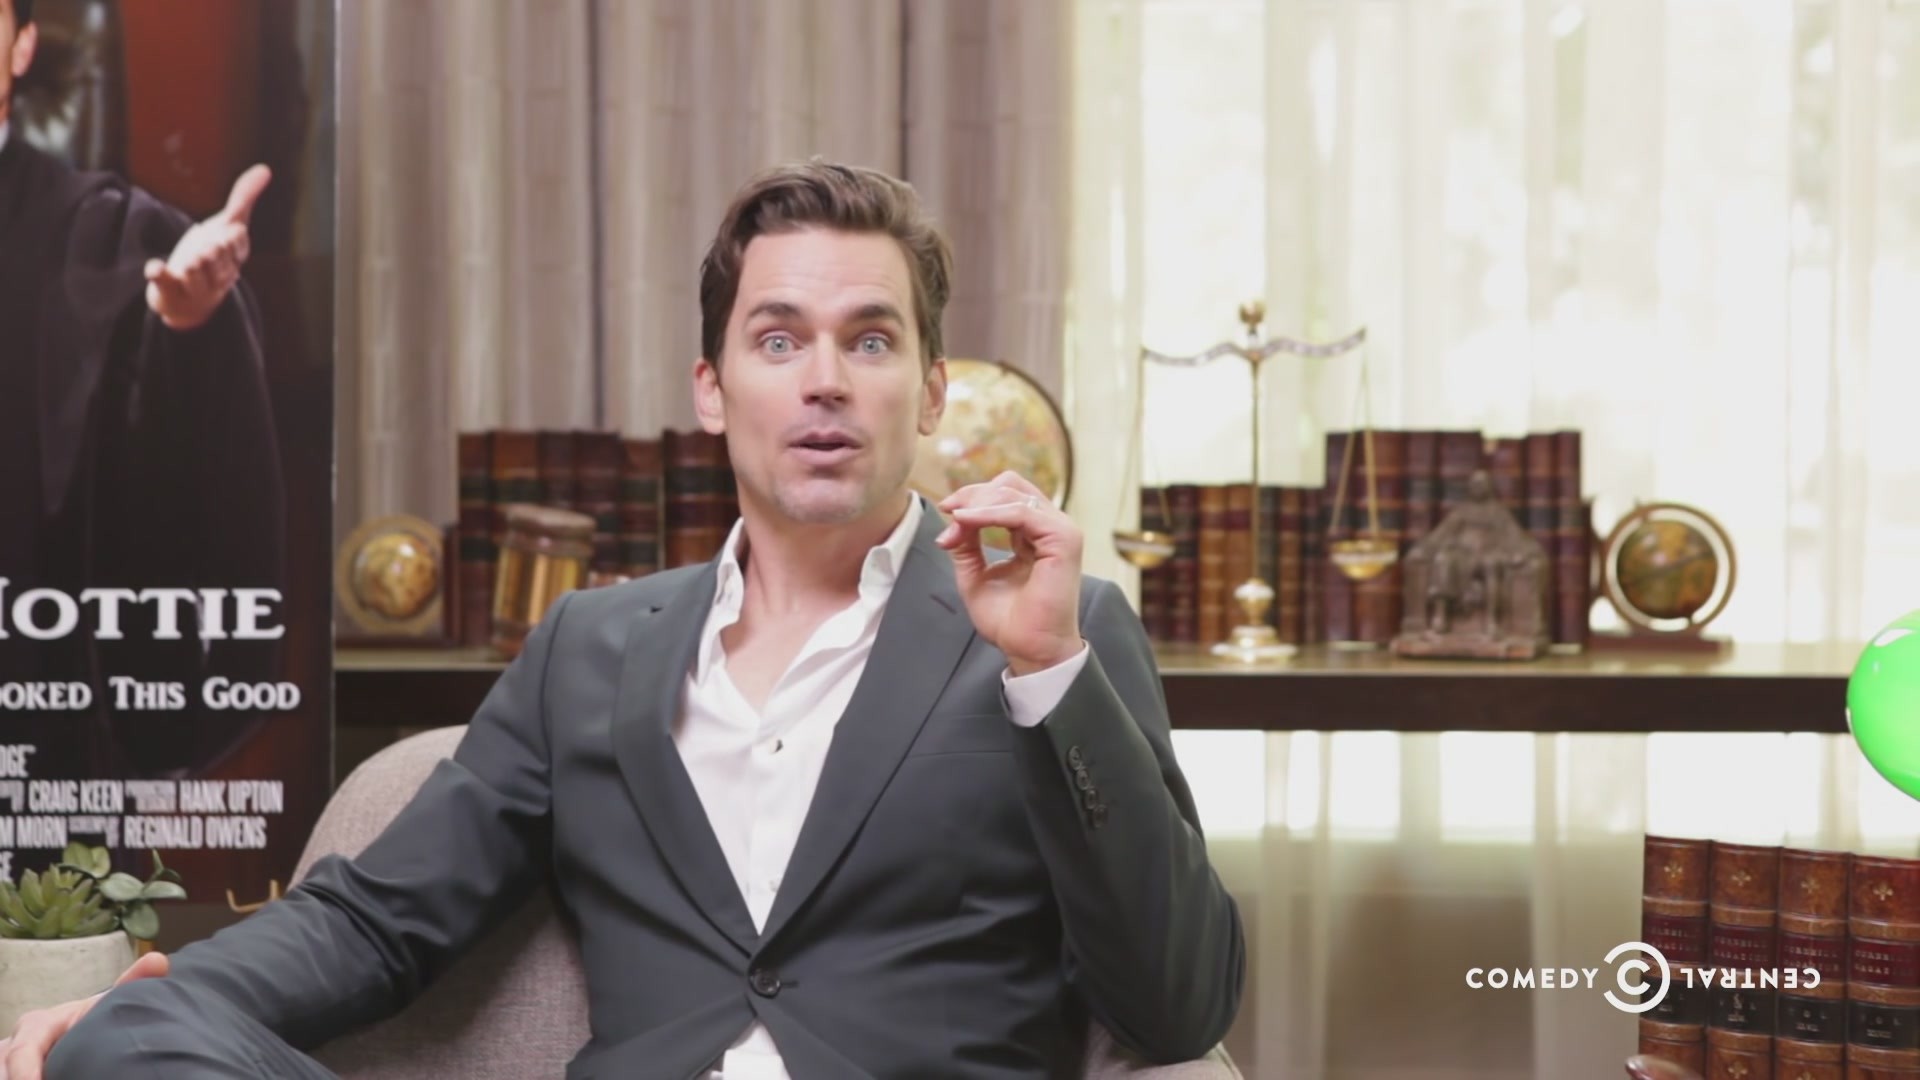 1920x1080 Comedy Central's Junketeers with Matt Bomer